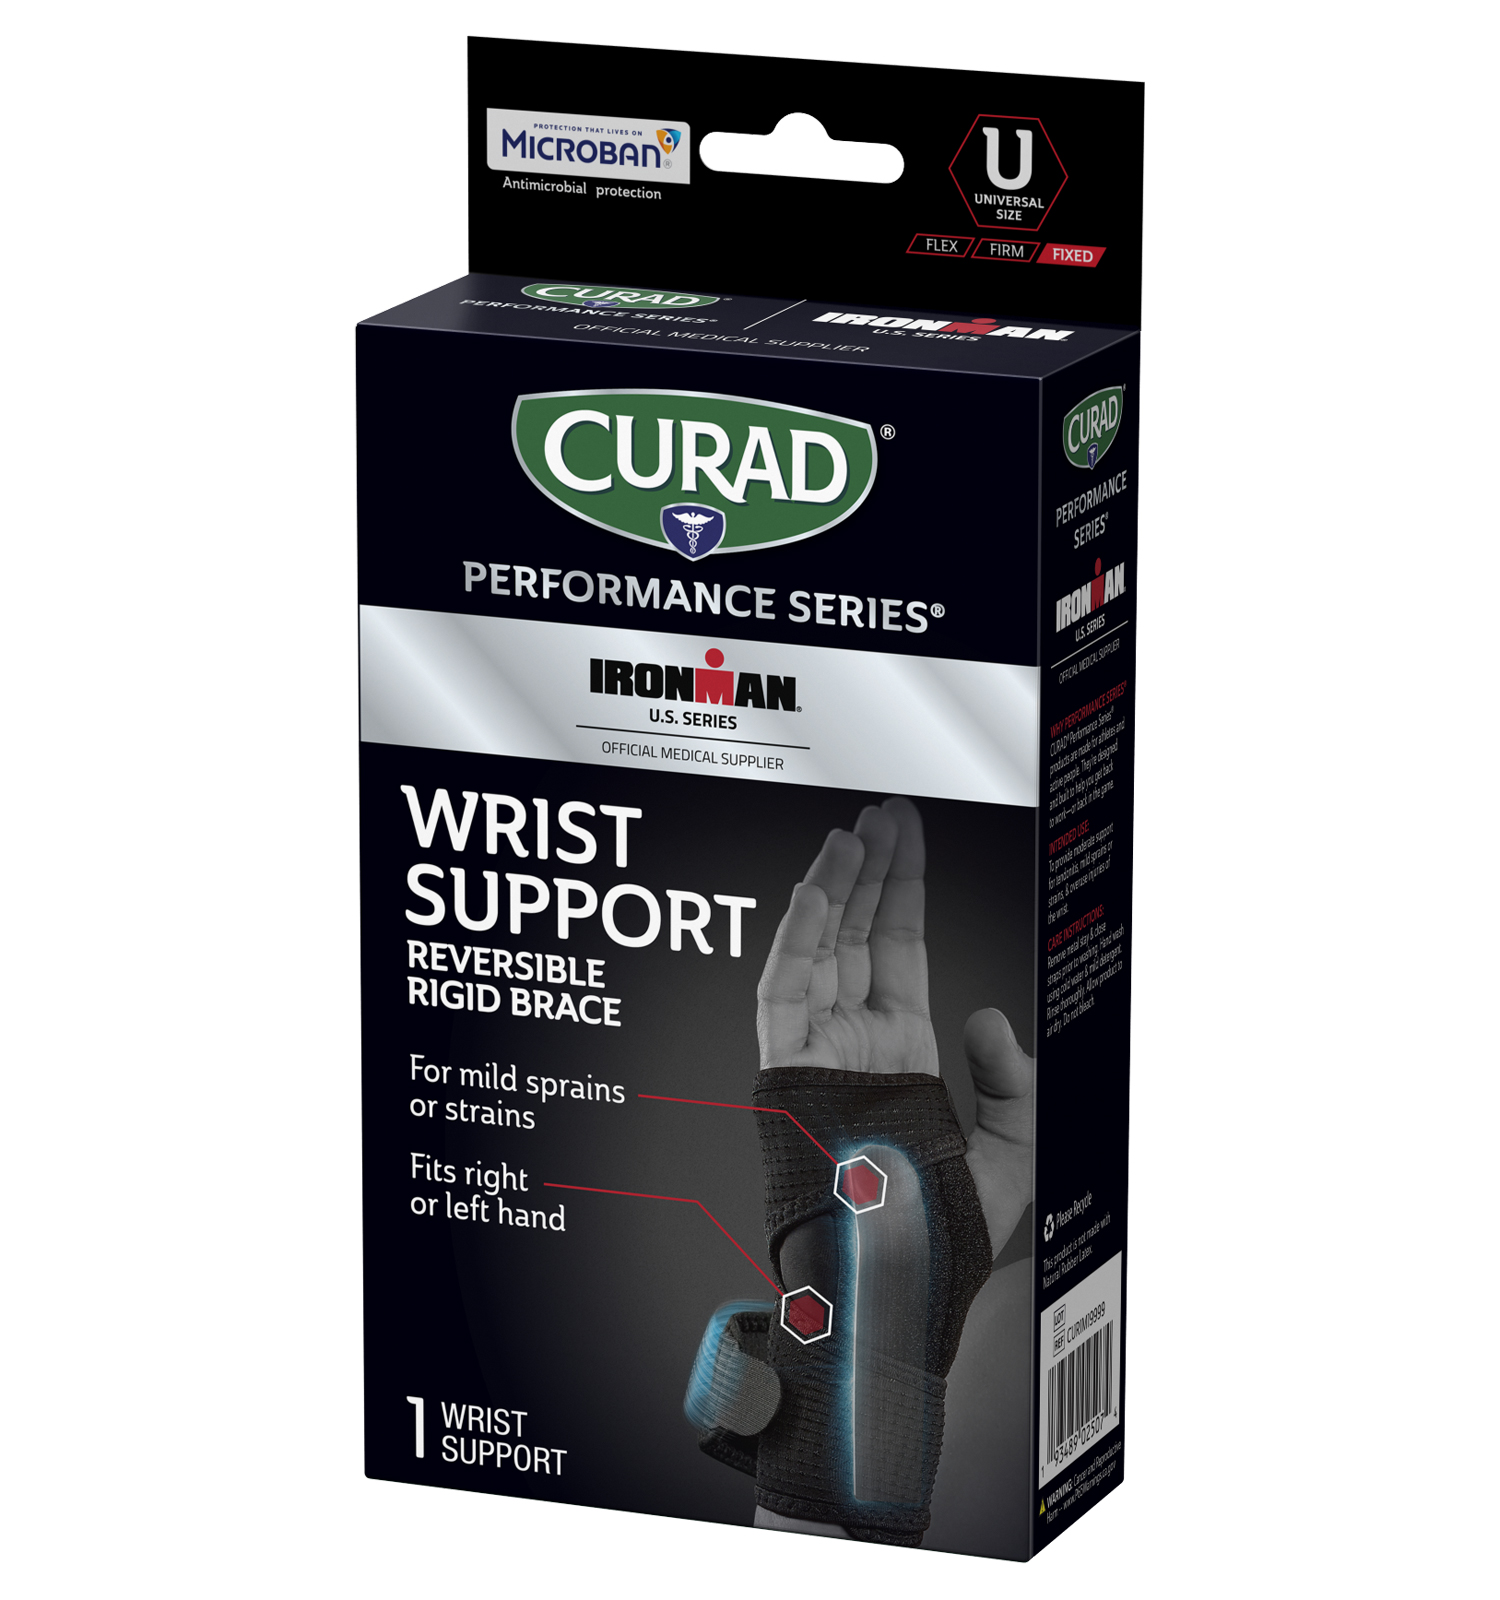 CURAD Performance Series IRONMAN Wrist Support, Reversible, Universal, 1  count